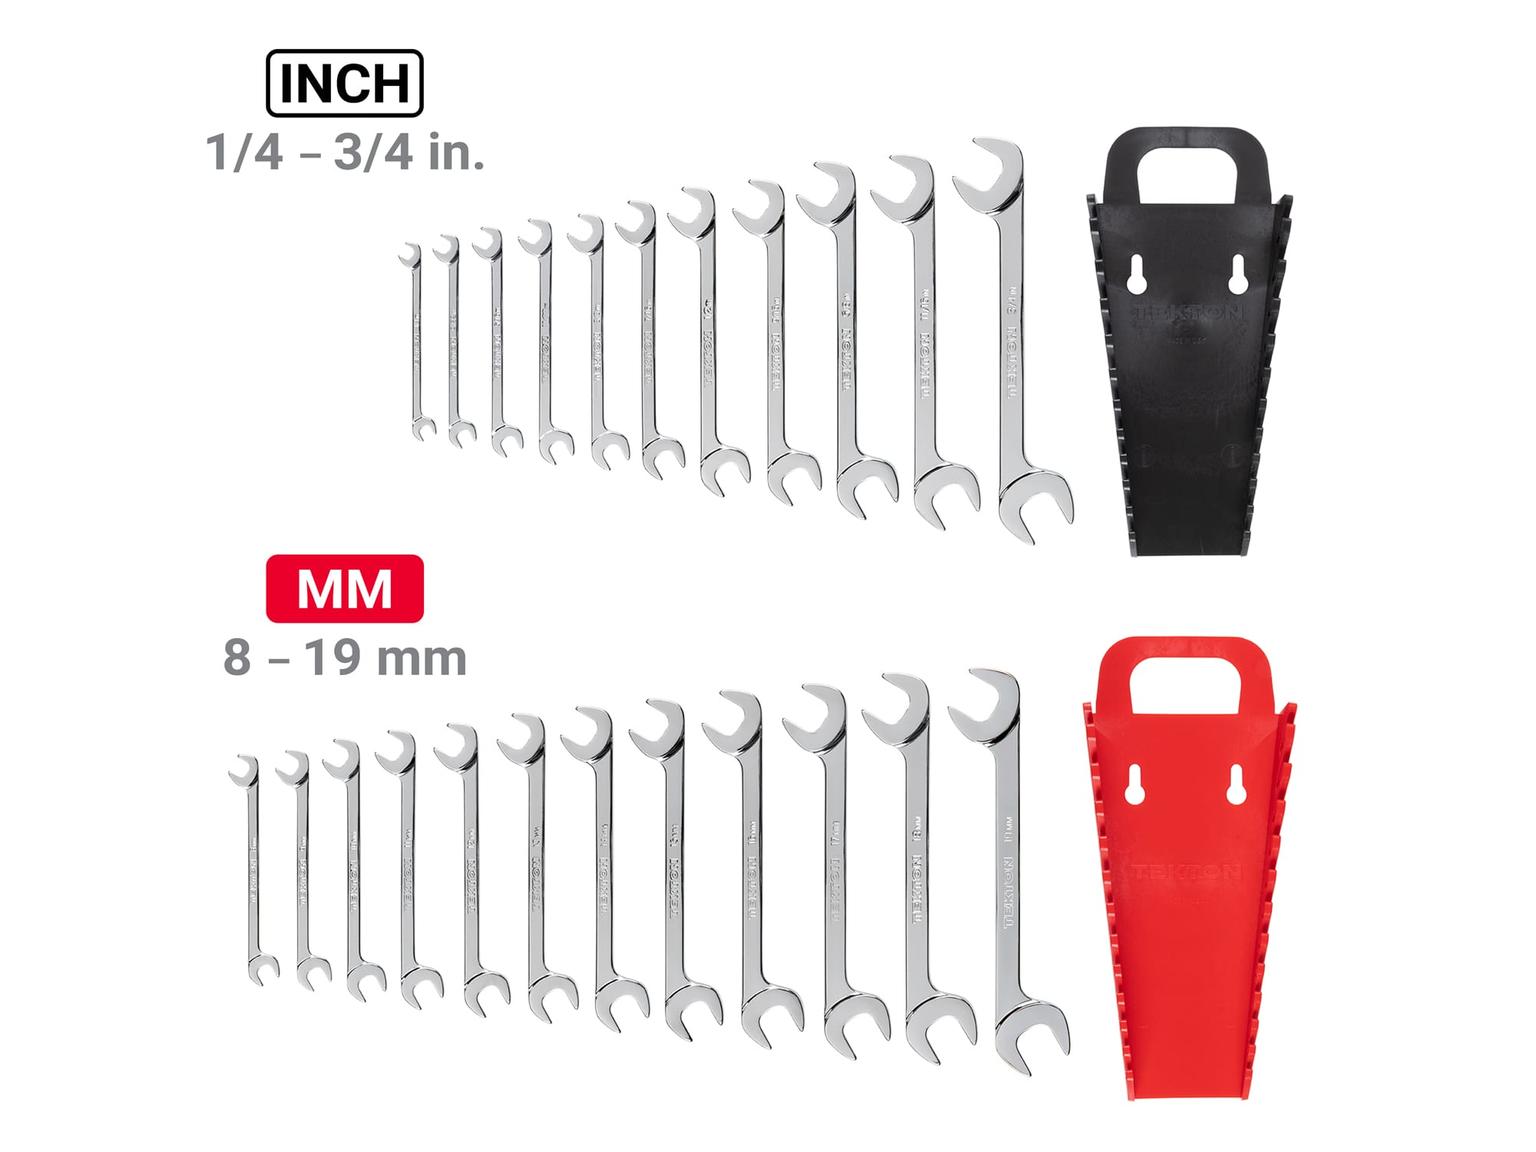 TEKTON WAE91301-T Angle Head Open End Wrench Set with Holder, 23-Piece (1/4 - 3/4 in., 8 - 19 mm)